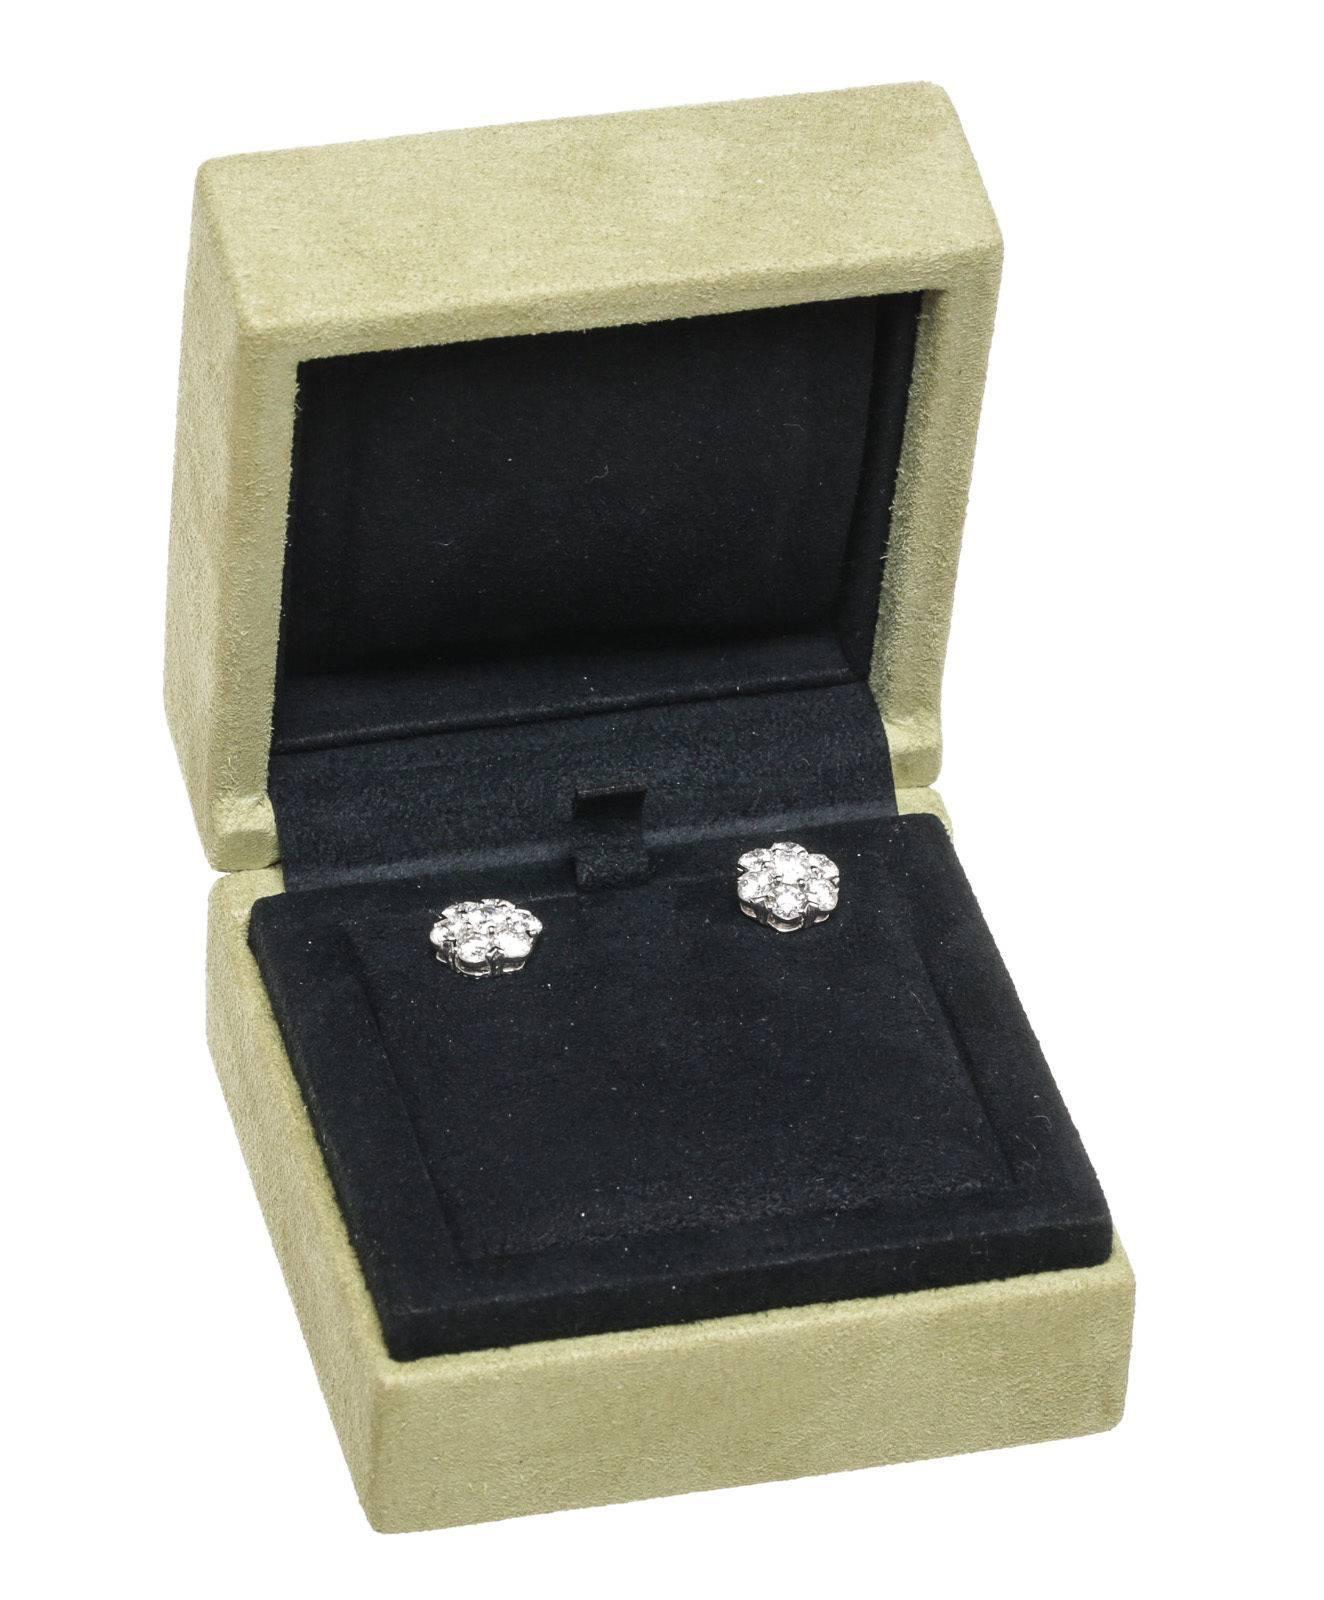 Designer: Van Cleef & Arpels
Type: Earring
Condition: 14 stones, 1.88 carats with Diamond Quality of DEF, IF to VVS
Color: Silver
Material: White Gold
Dimensions: Large Size
Description:
Sku: 9253